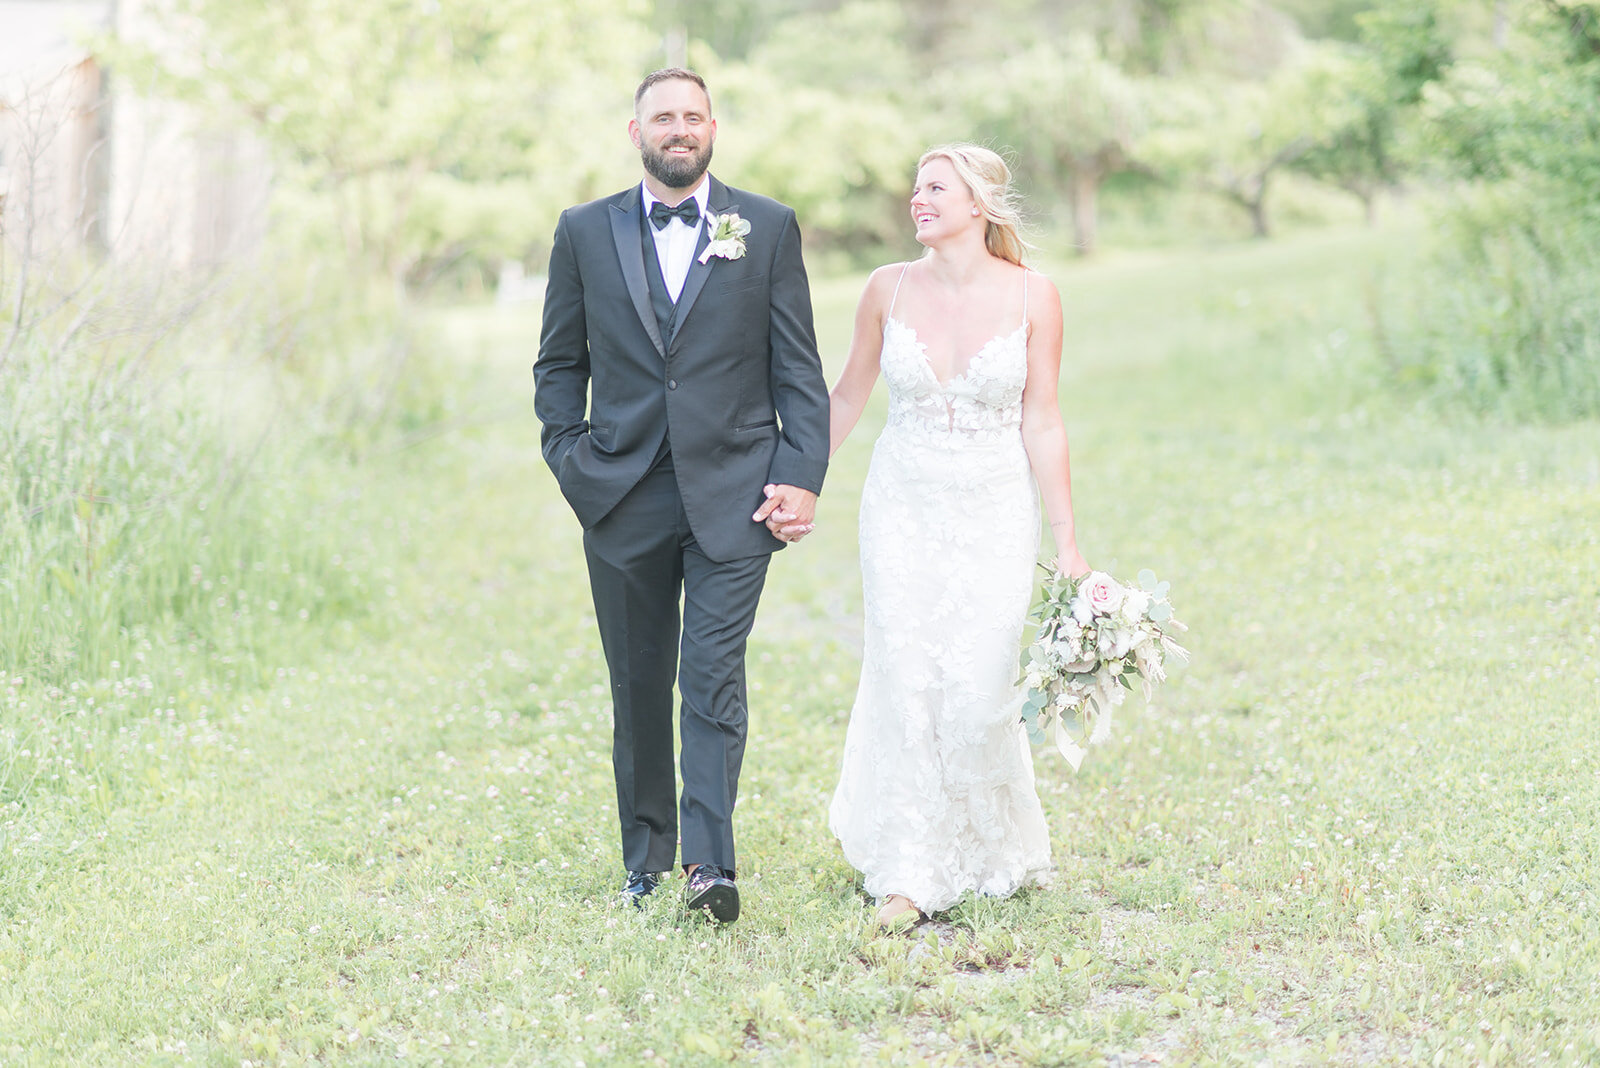 Whimsical Cabin Elopement Inspiration in Ohiopyle State Park